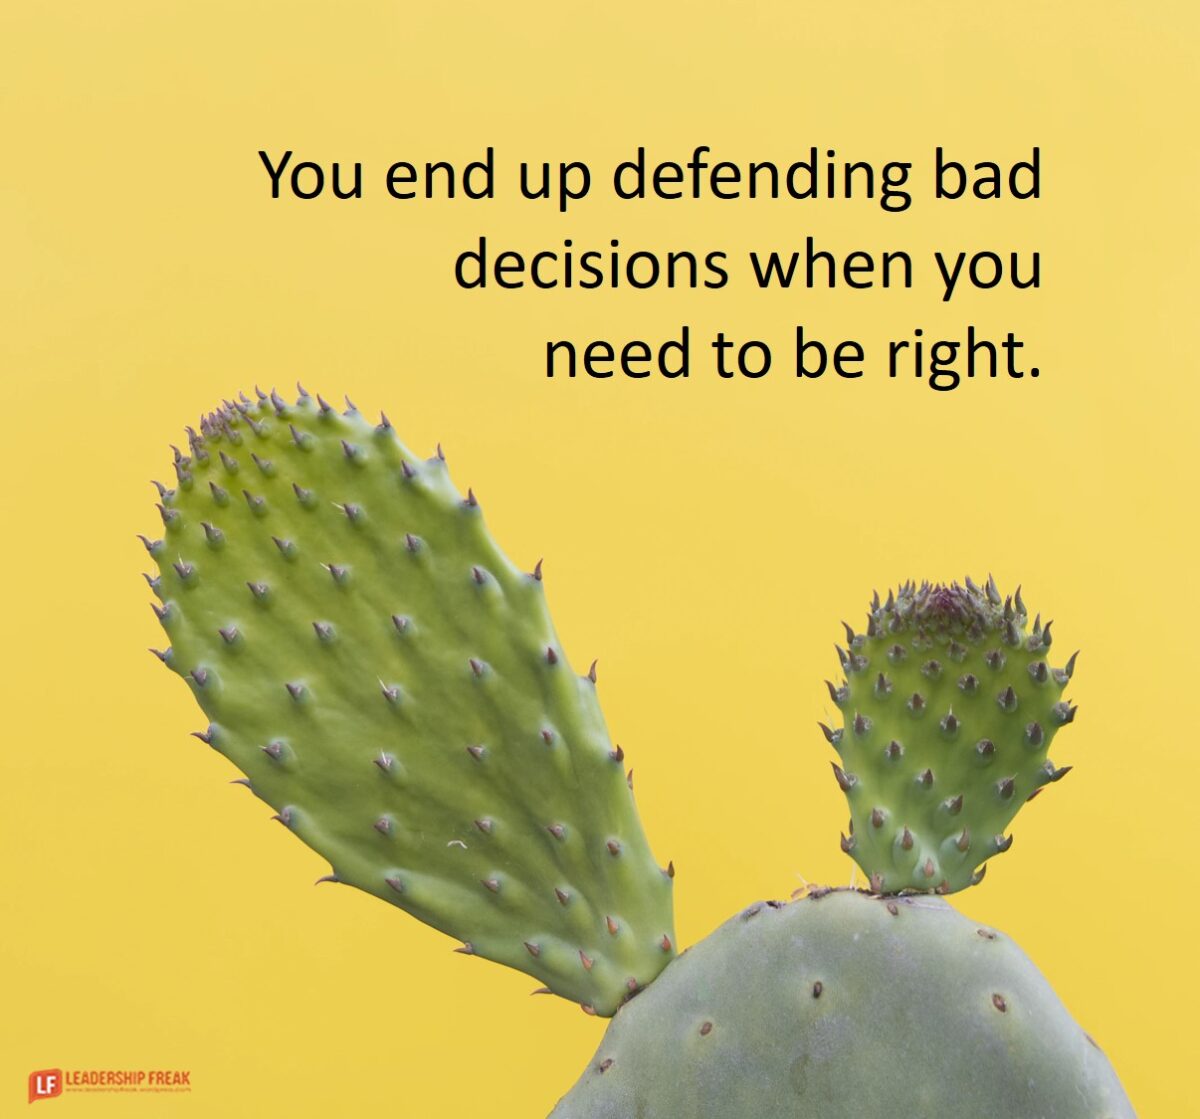 4 Reasons We Make Dumb Decisions and 7 Ways to Make Smart Decisions